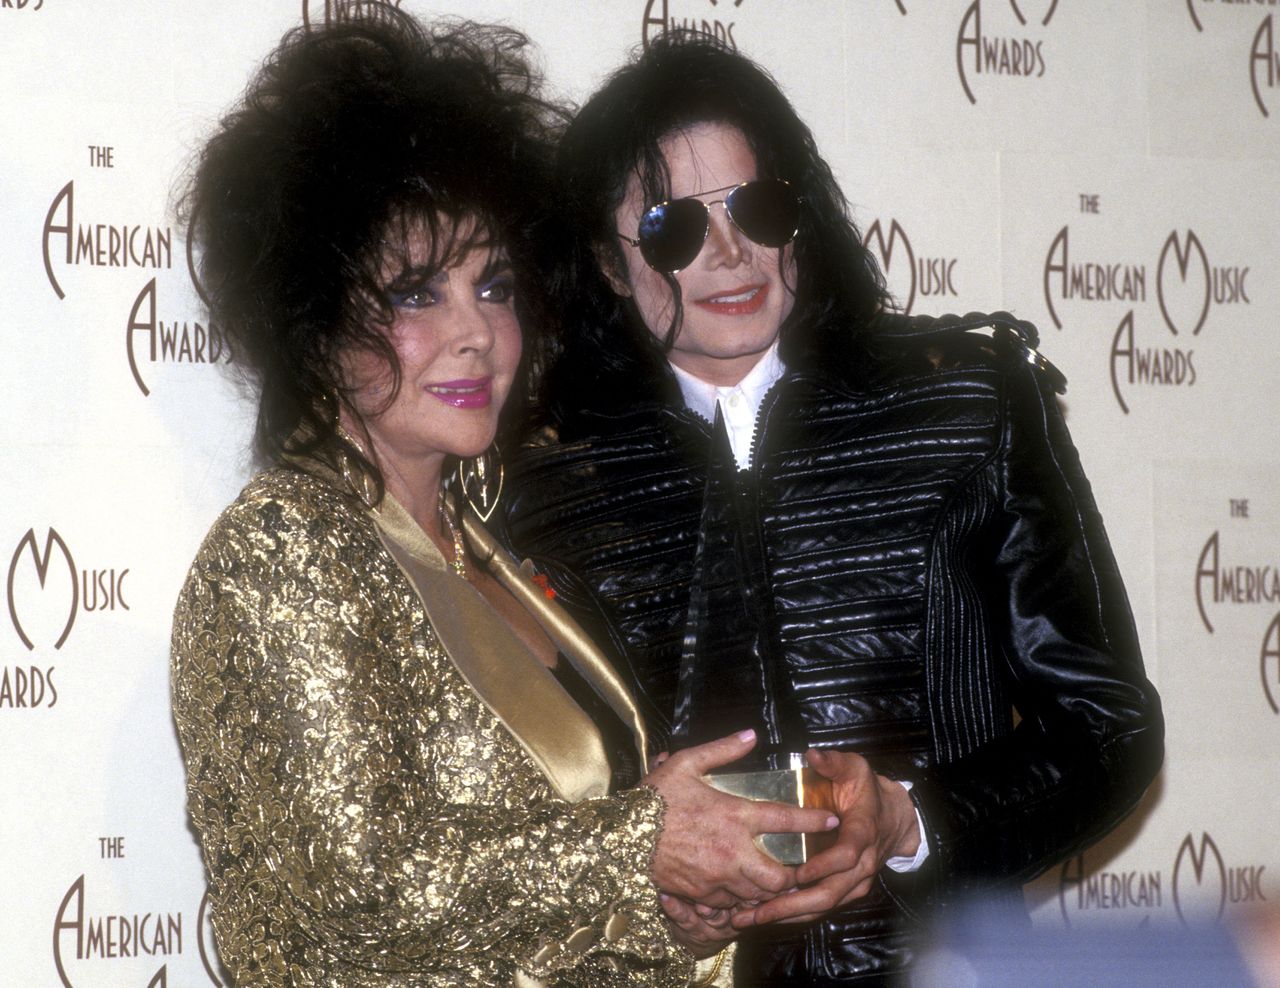 Babyface: Madonna told Michael Jackson to dress like a girl for video